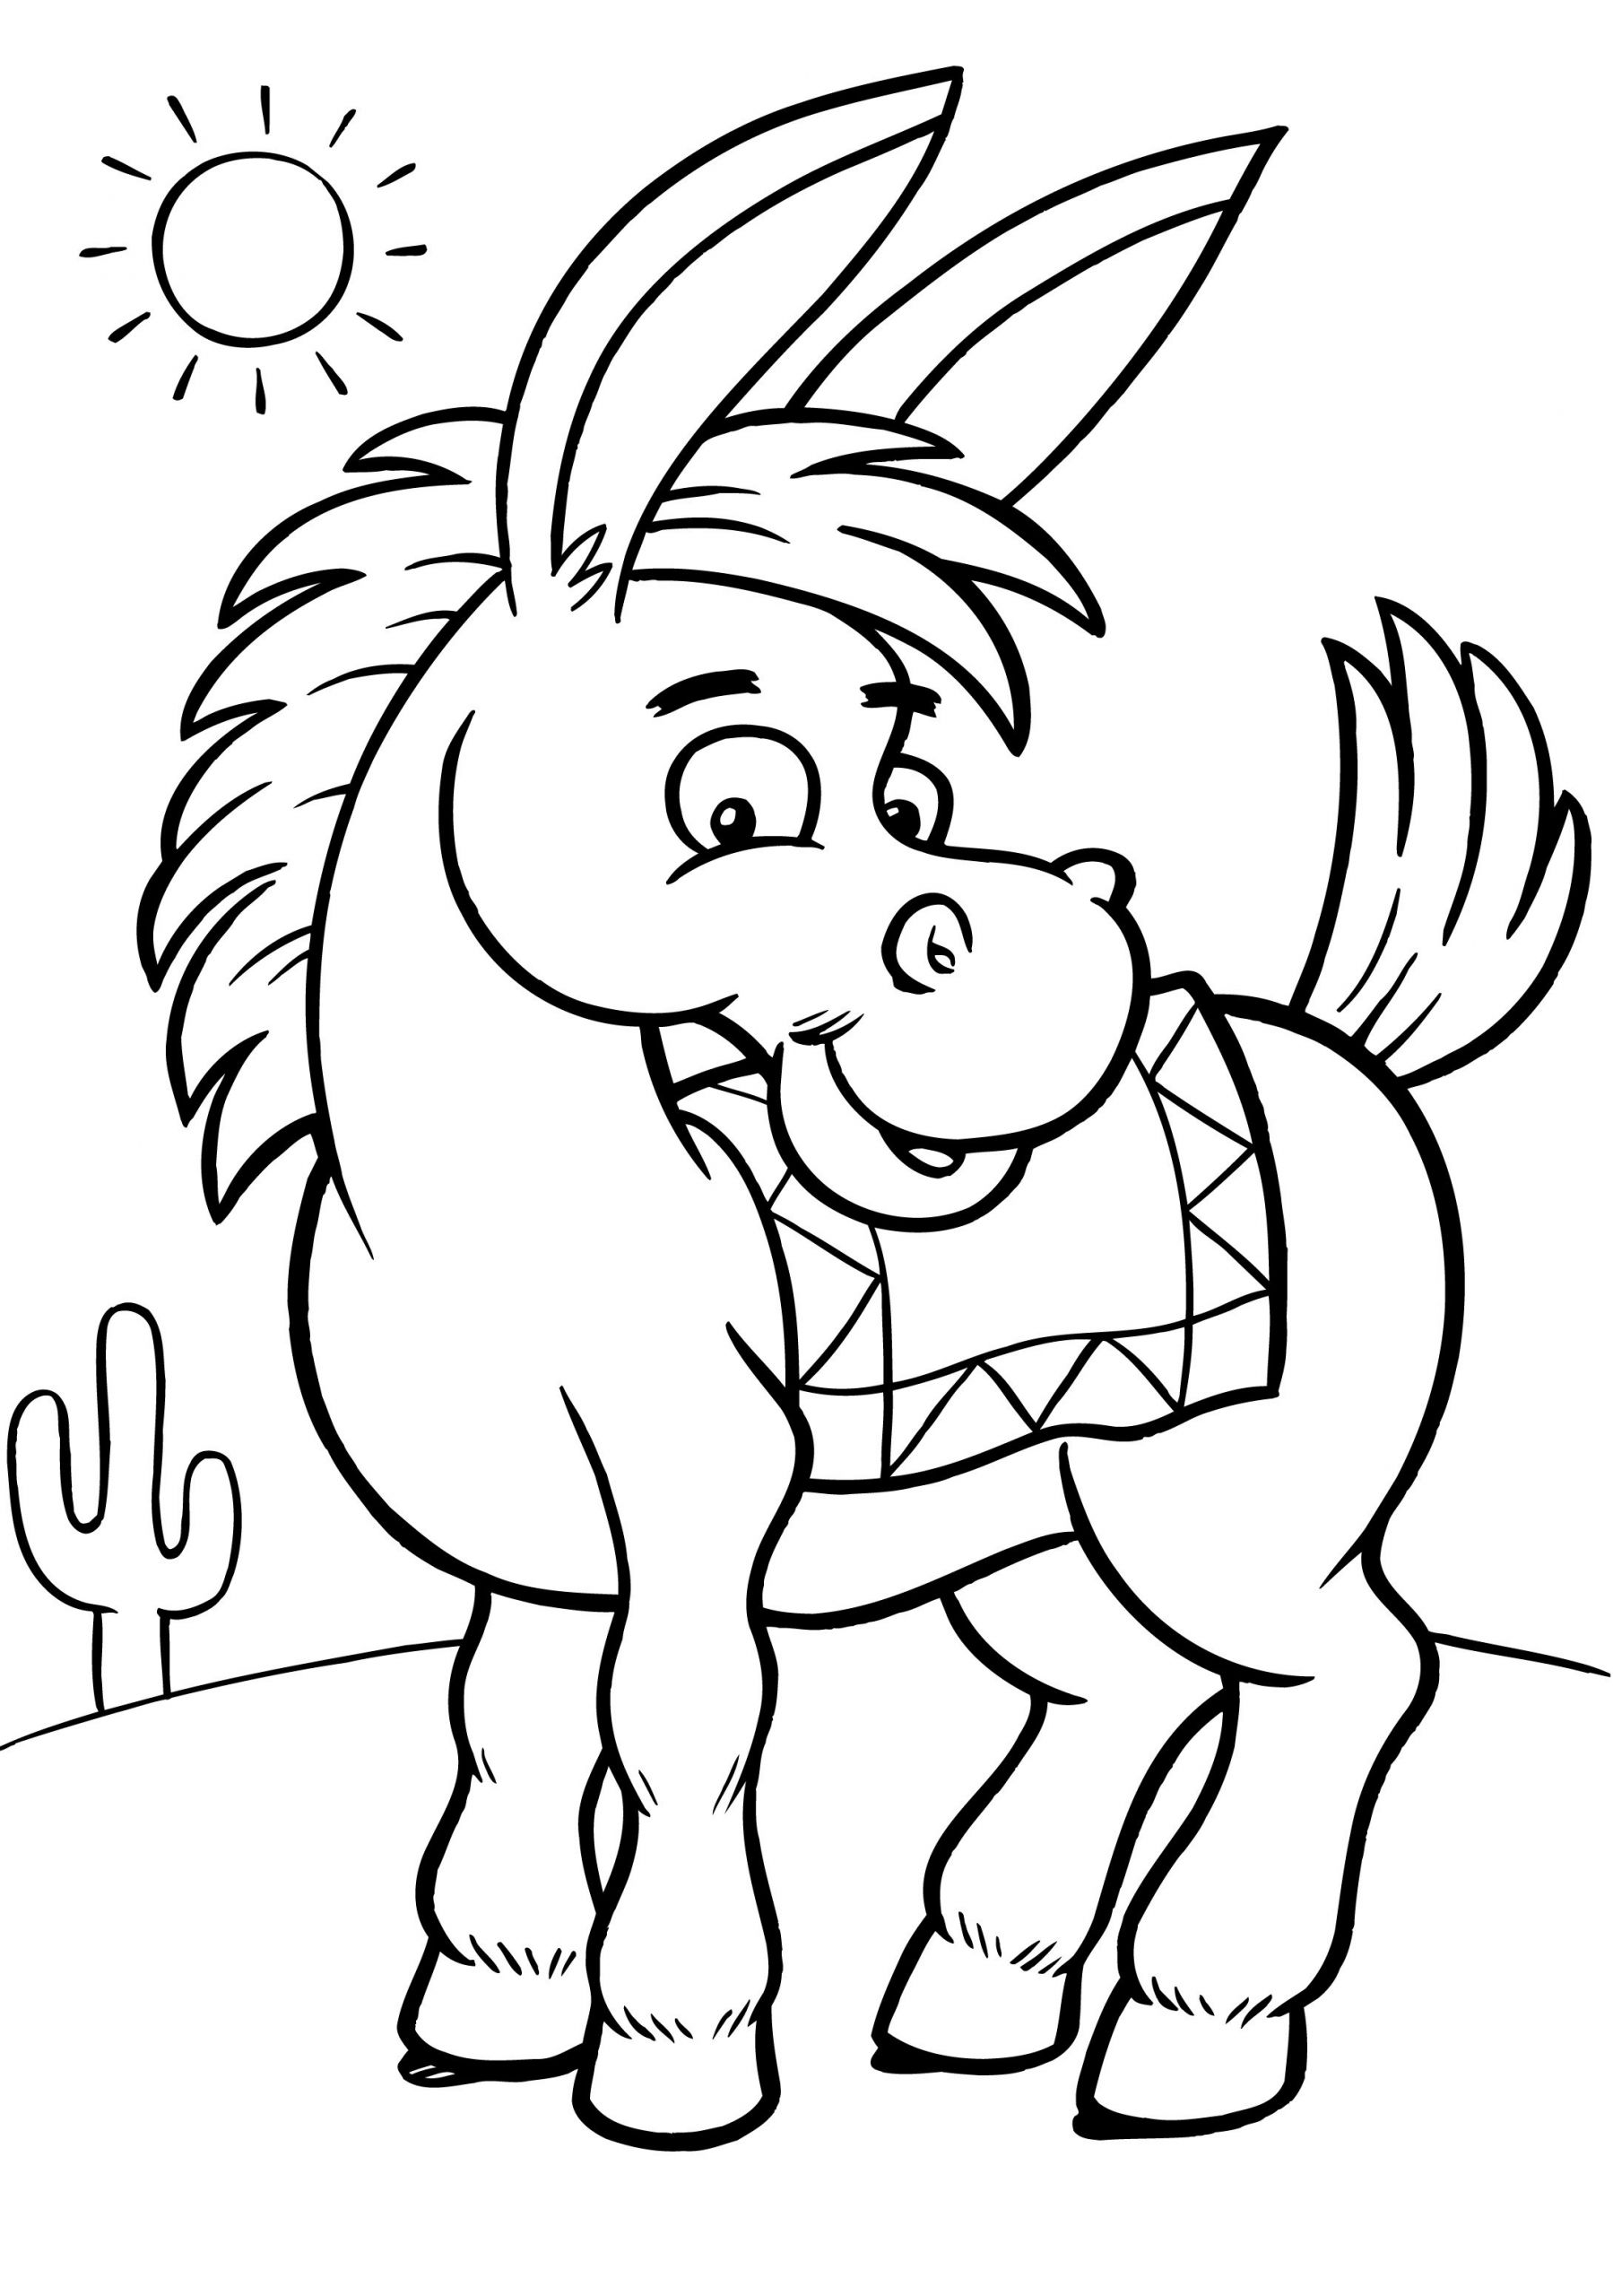 Coloring Pages For Kids Free
 Free Printable Donkey Coloring Pages For Kids